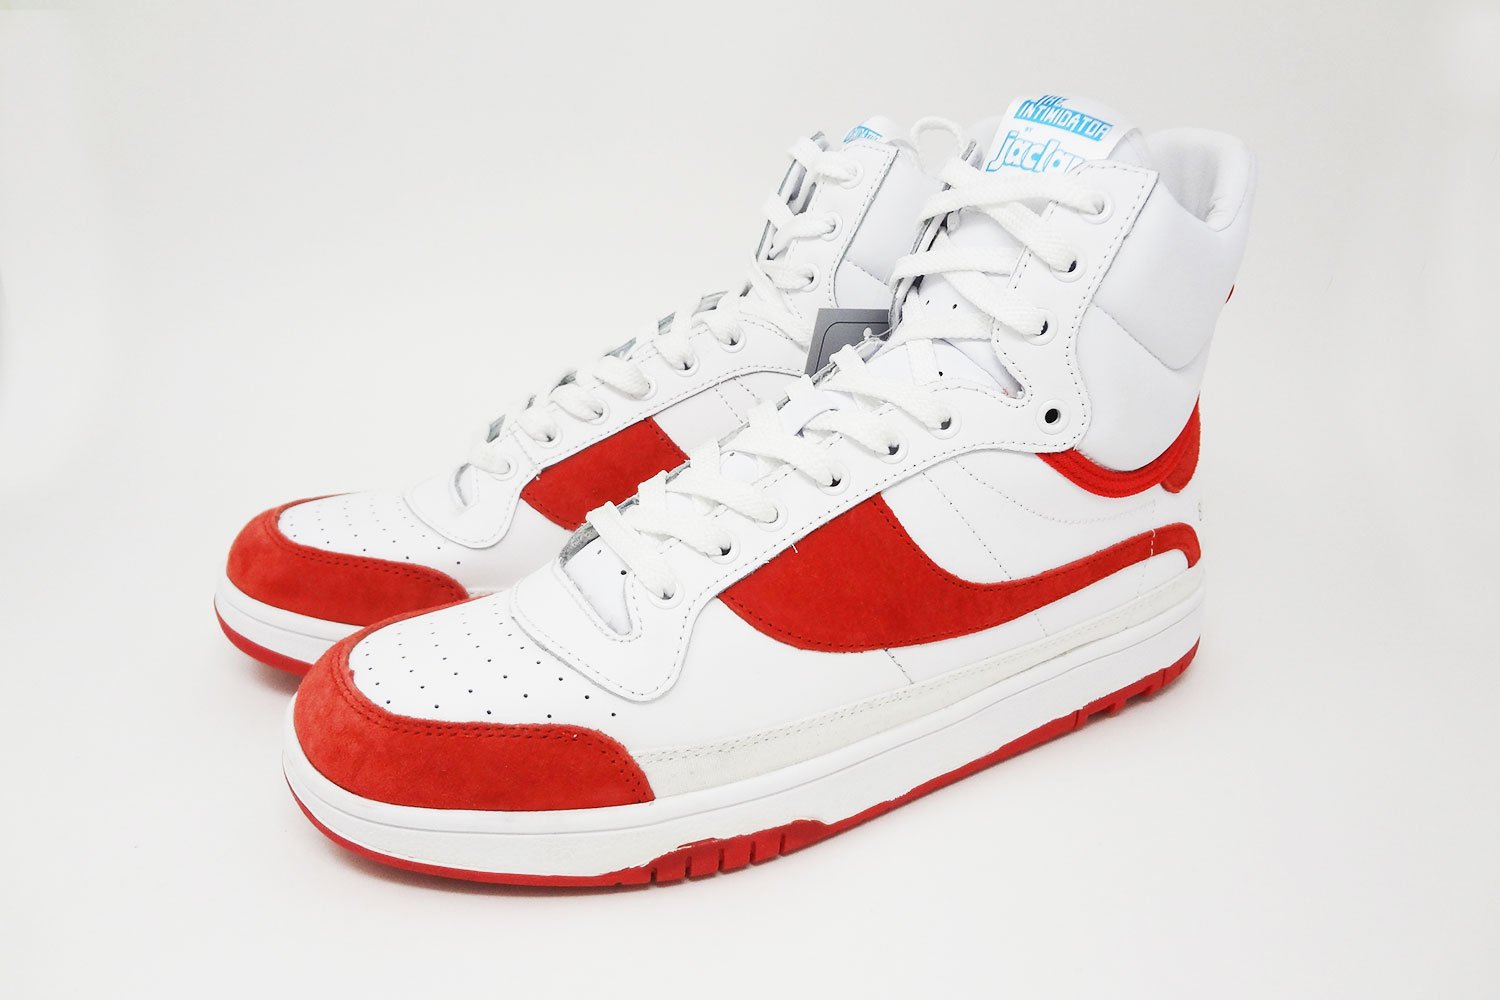 Jaclar The Intimidator Retro Basketball High Top 3-4 Sneakers @ The Deffest